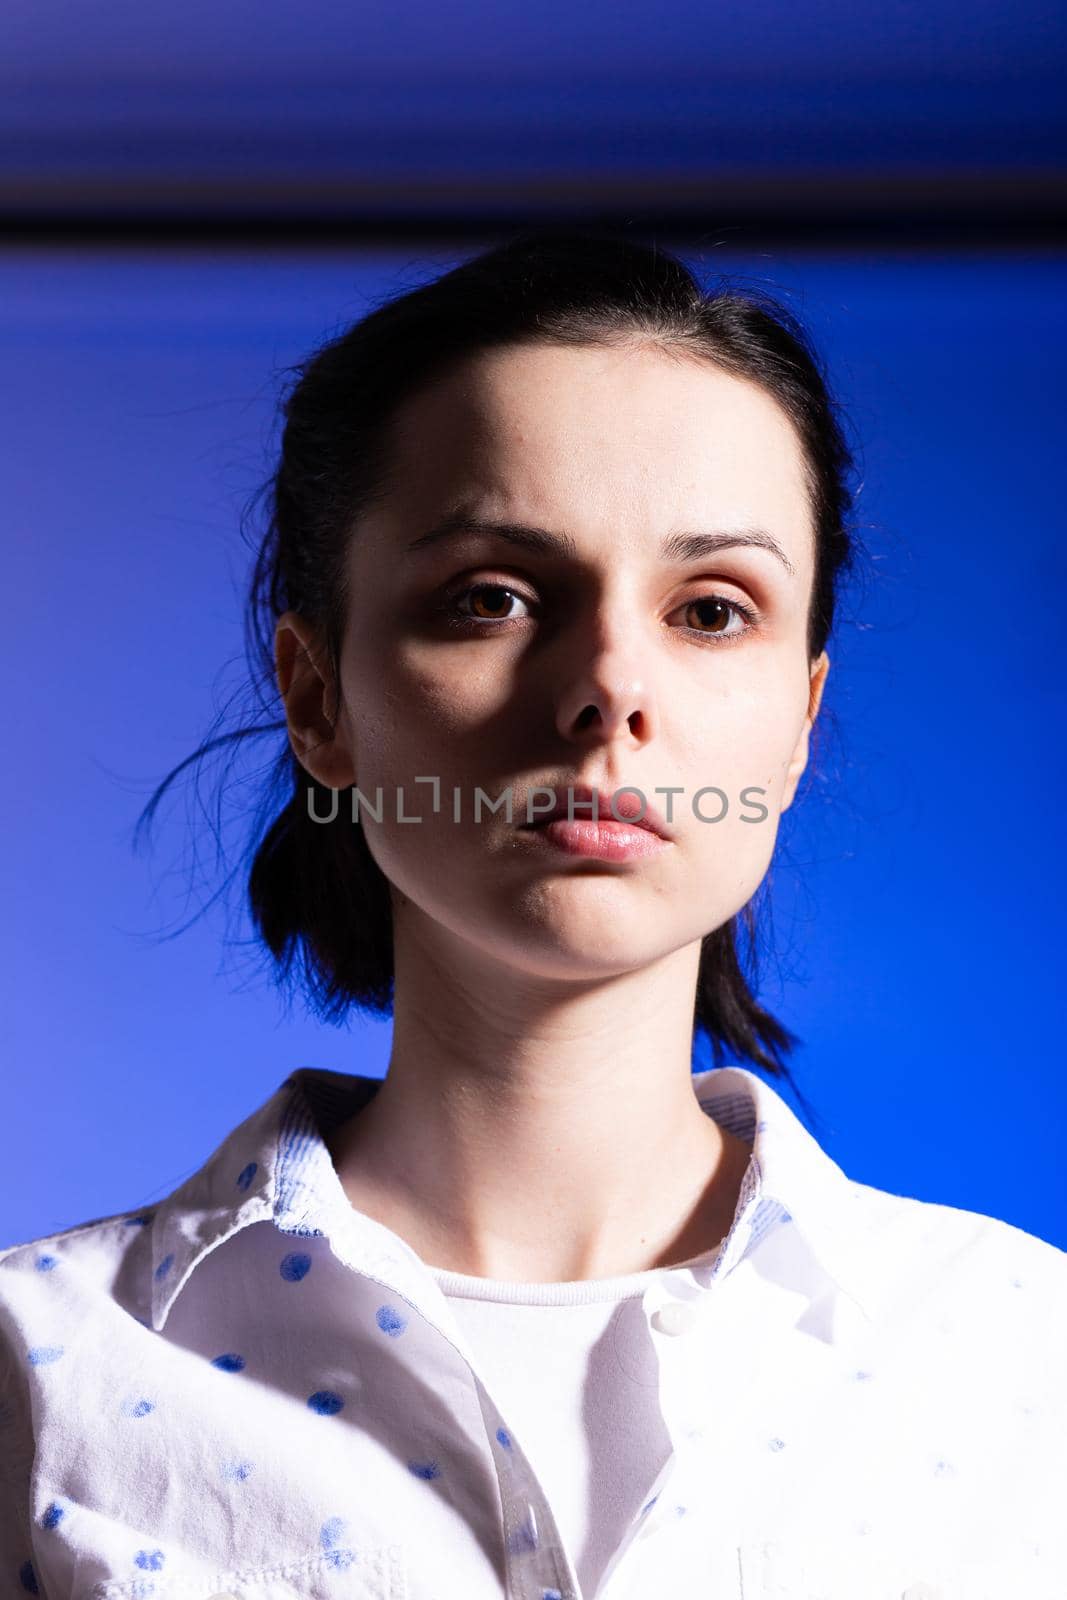 brunette woman in a white shirt with polka dots, on a blue background by shilovskaya